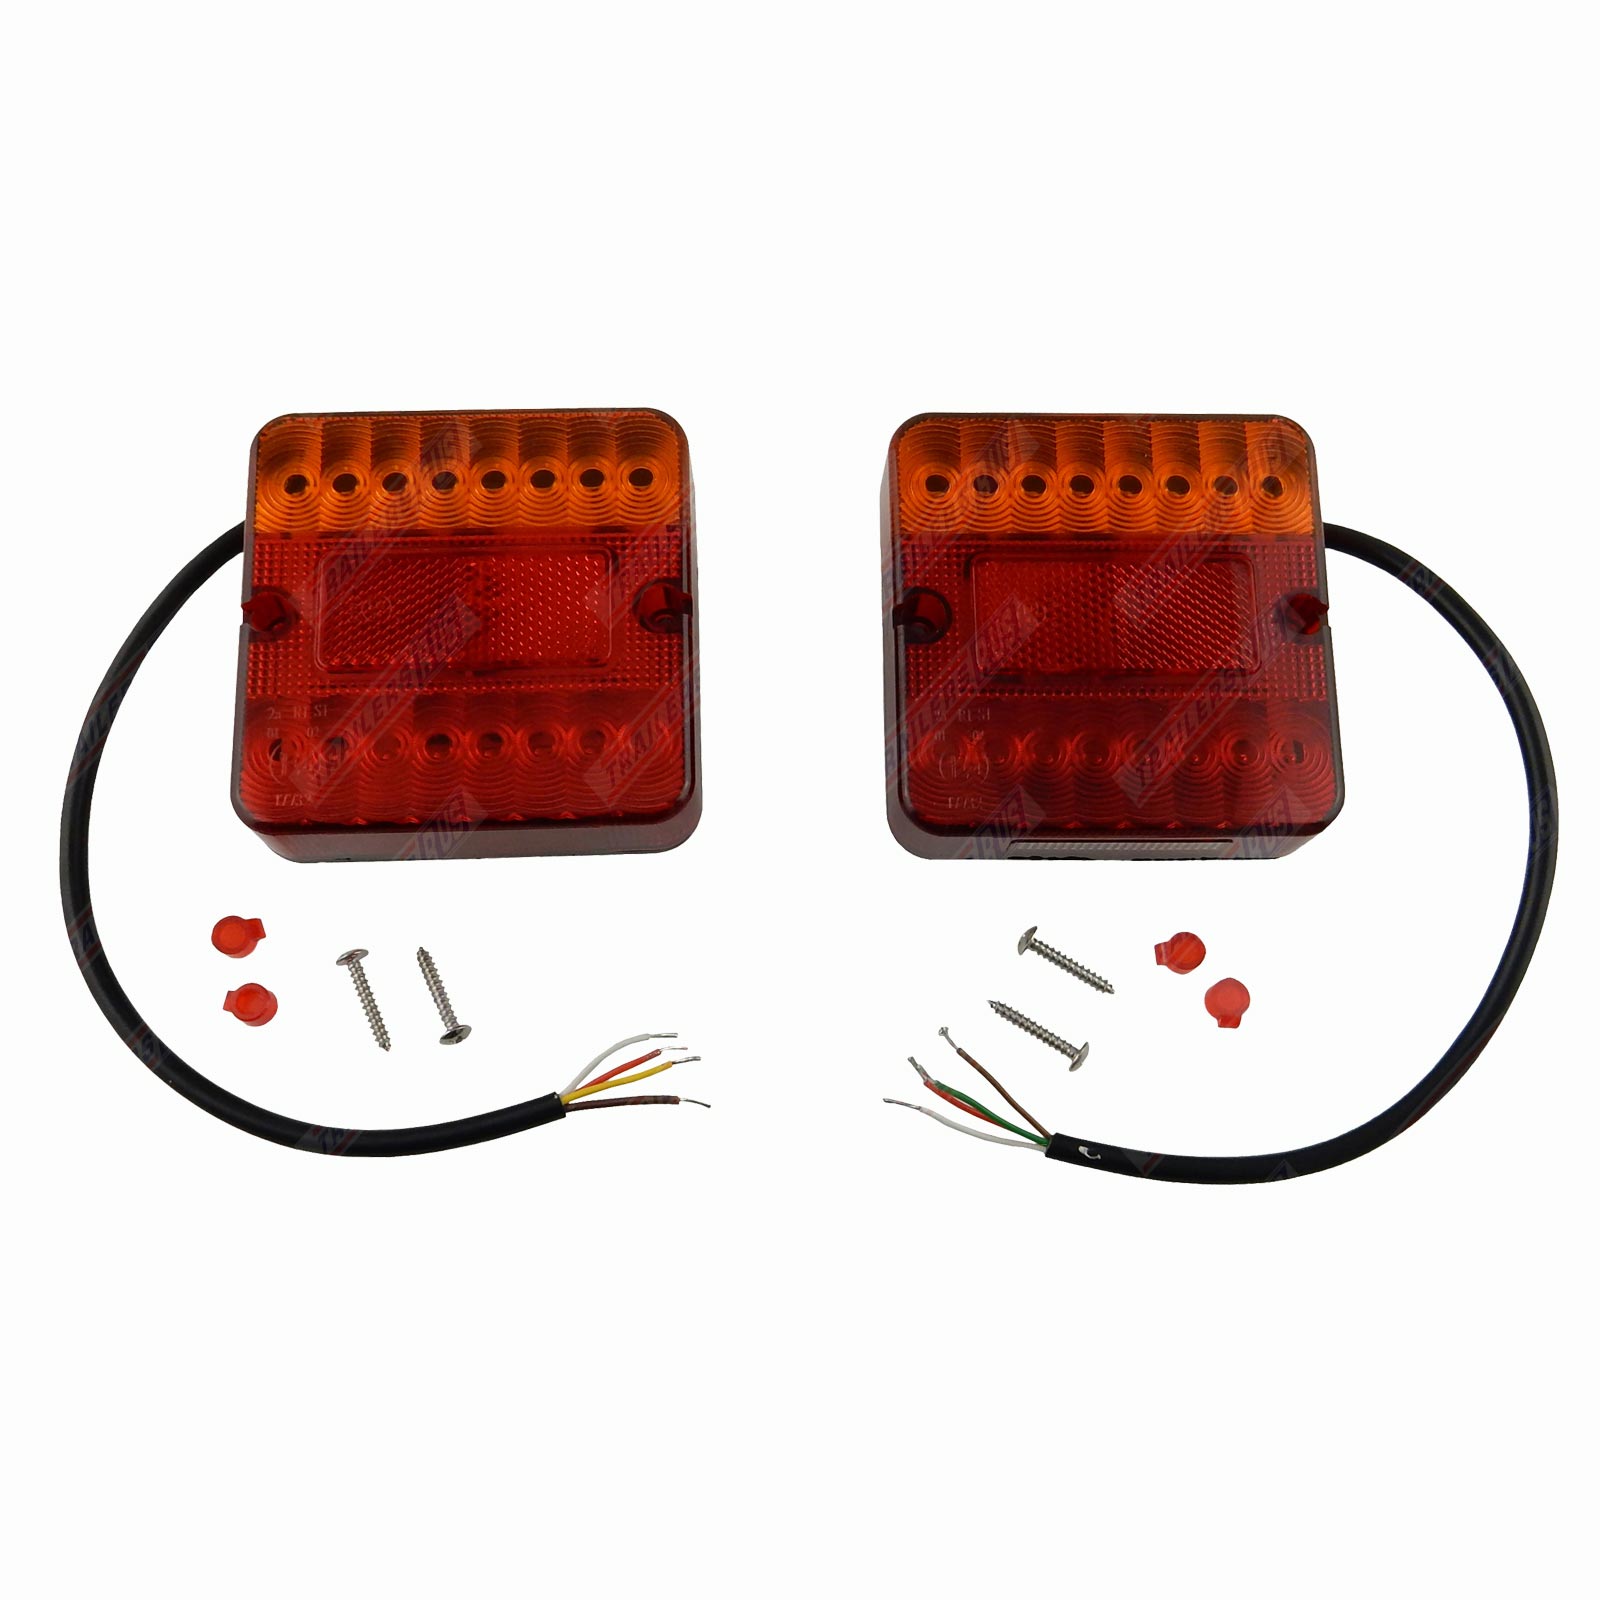 6PCS Red/Amber 2.5 Oval Led Marker Lights Compatible with RV Qiilu 12V Submersible Led Truck Trailer Lights Kit Camper 2PCS Square LED Trailer Light Kits Trailer Marine Boat 